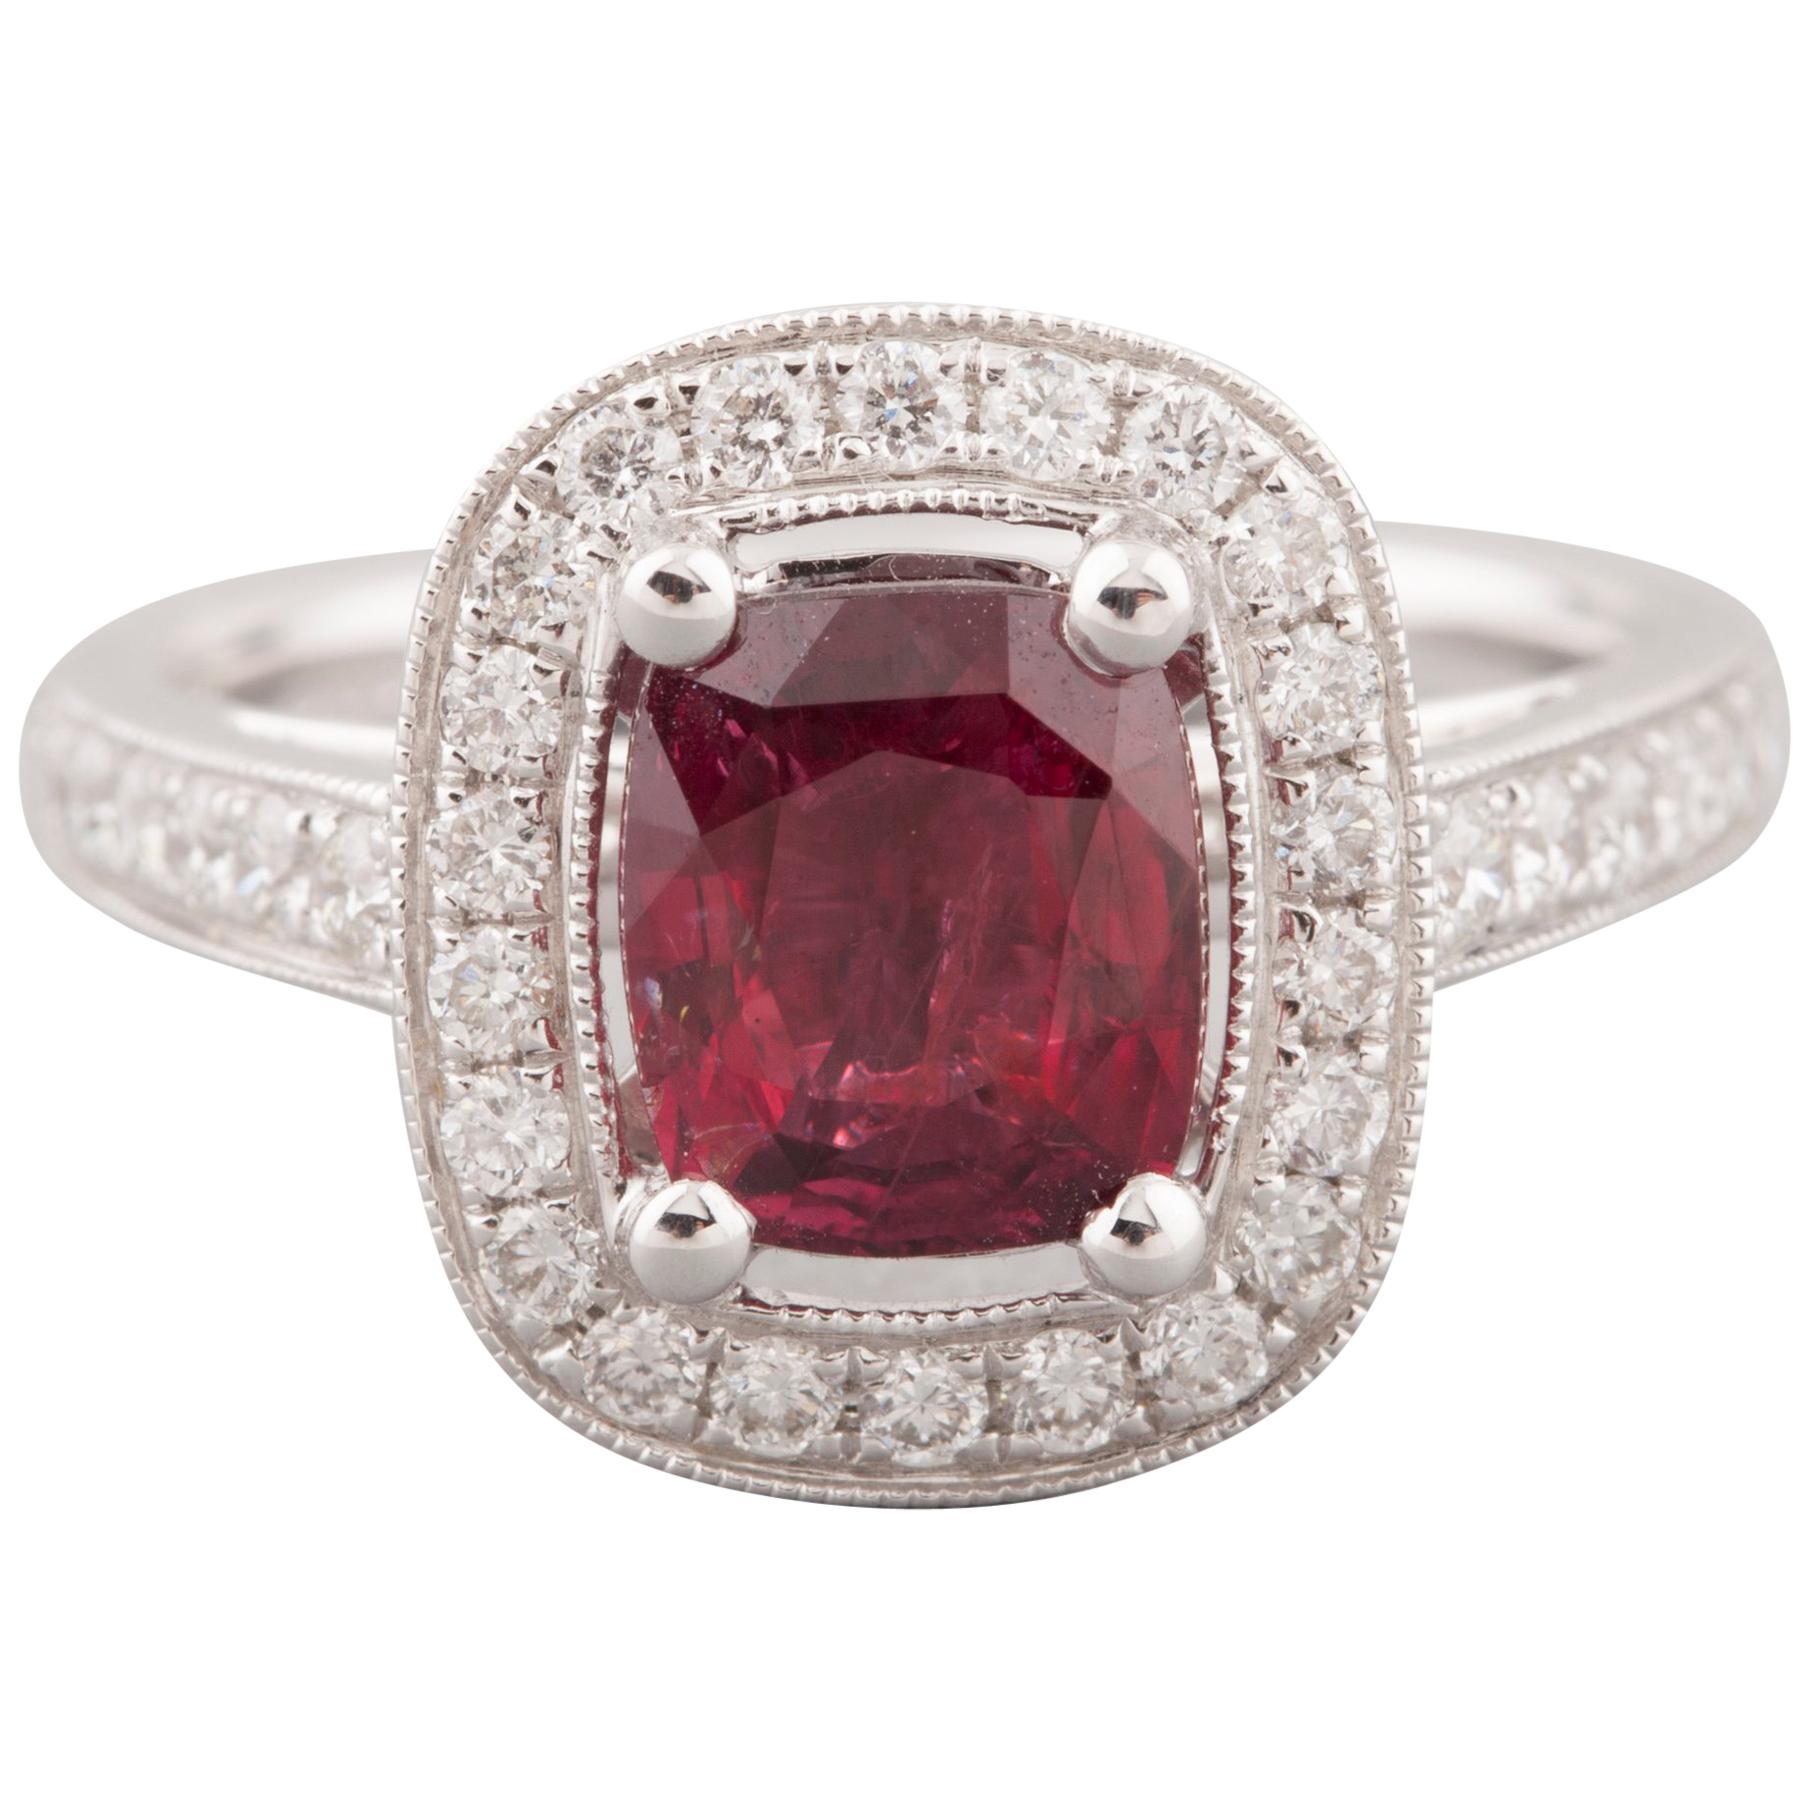 Certified 2.09 Carat Ruby and Diamonds Ring